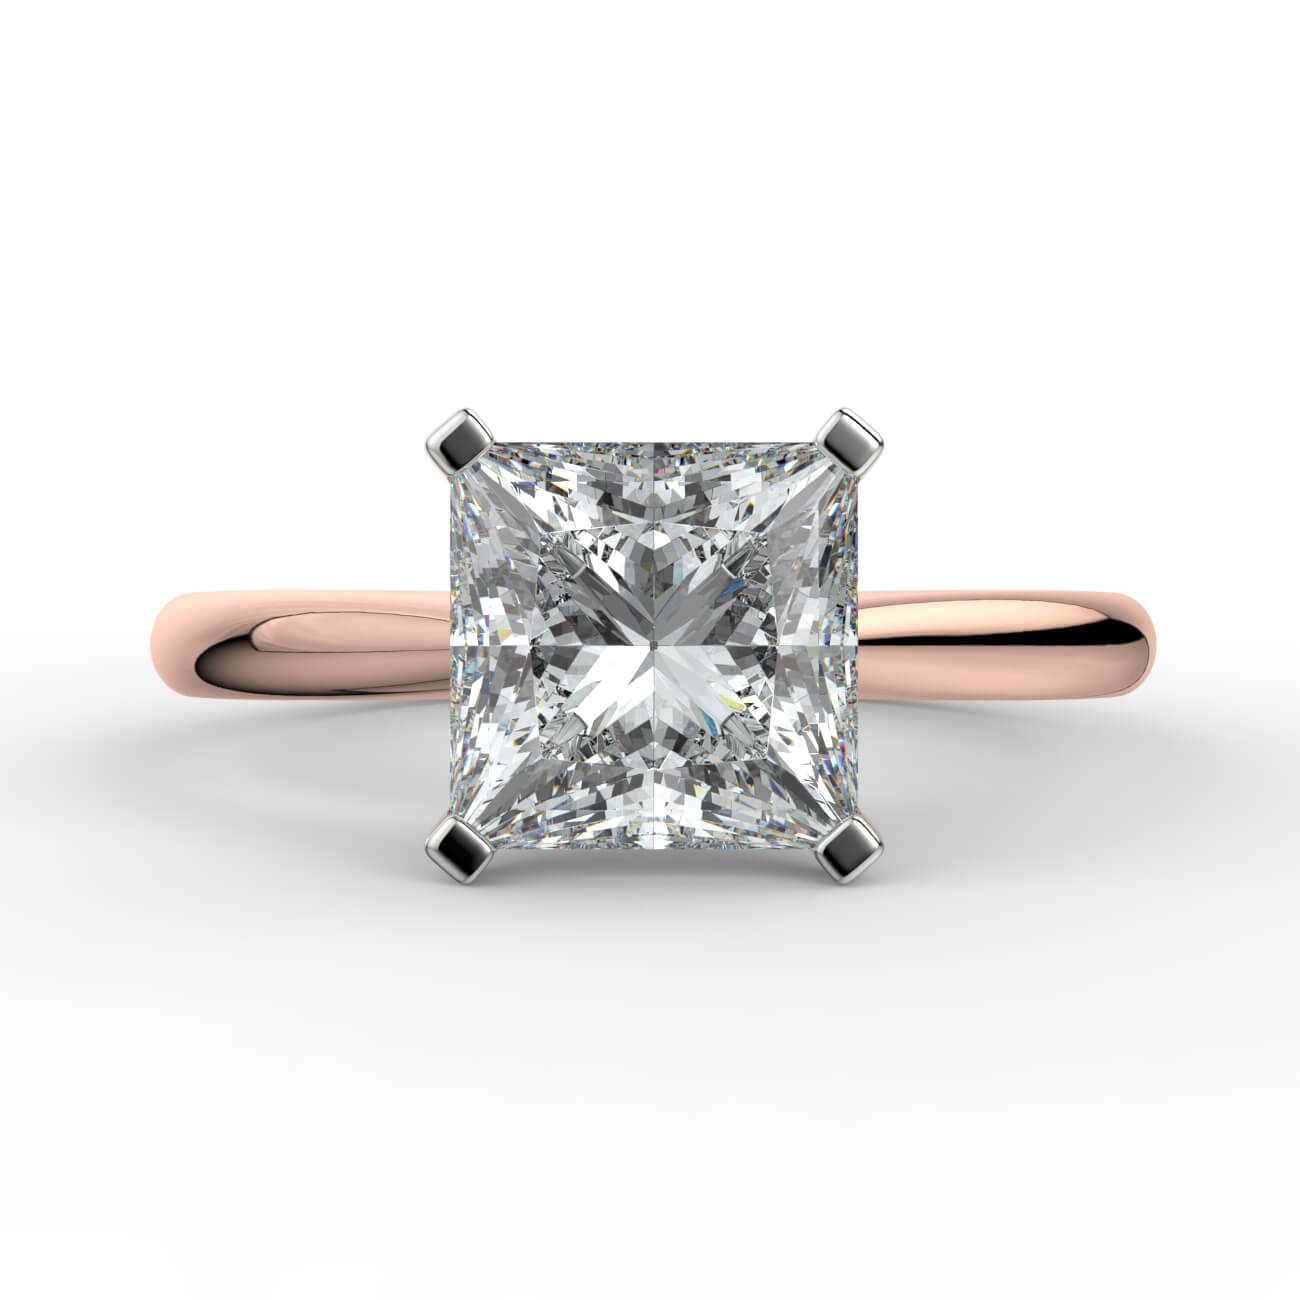 Princess cut diamond cathedral engagement ring in white and rose gold – Australian Diamond Network